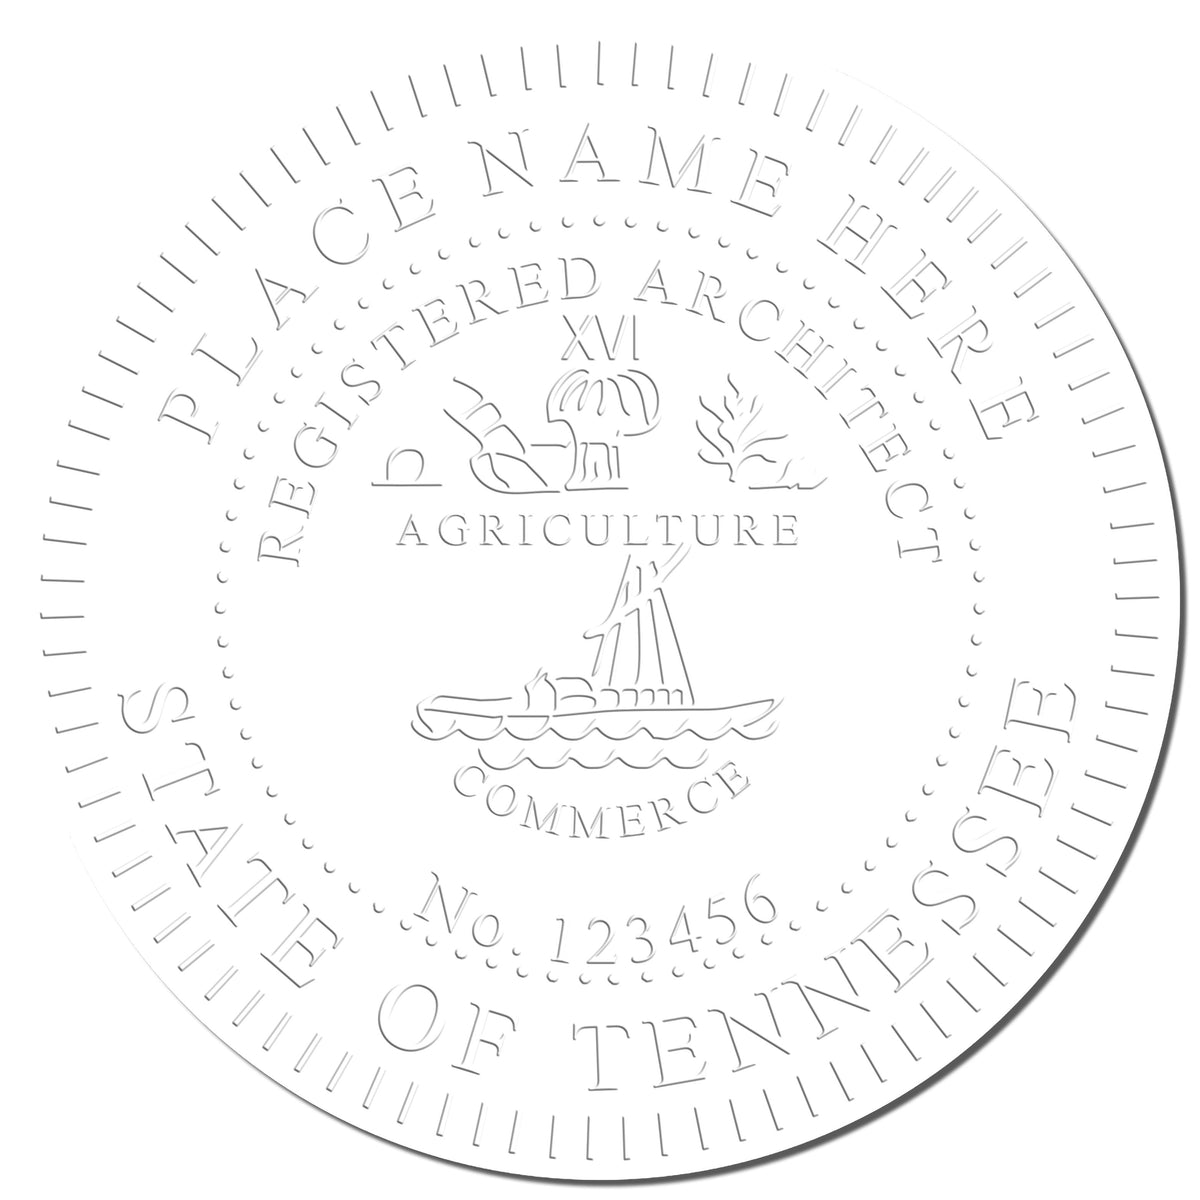 A photograph of the Handheld Tennessee Architect Seal Embosser stamp impression reveals a vivid, professional image of the on paper.